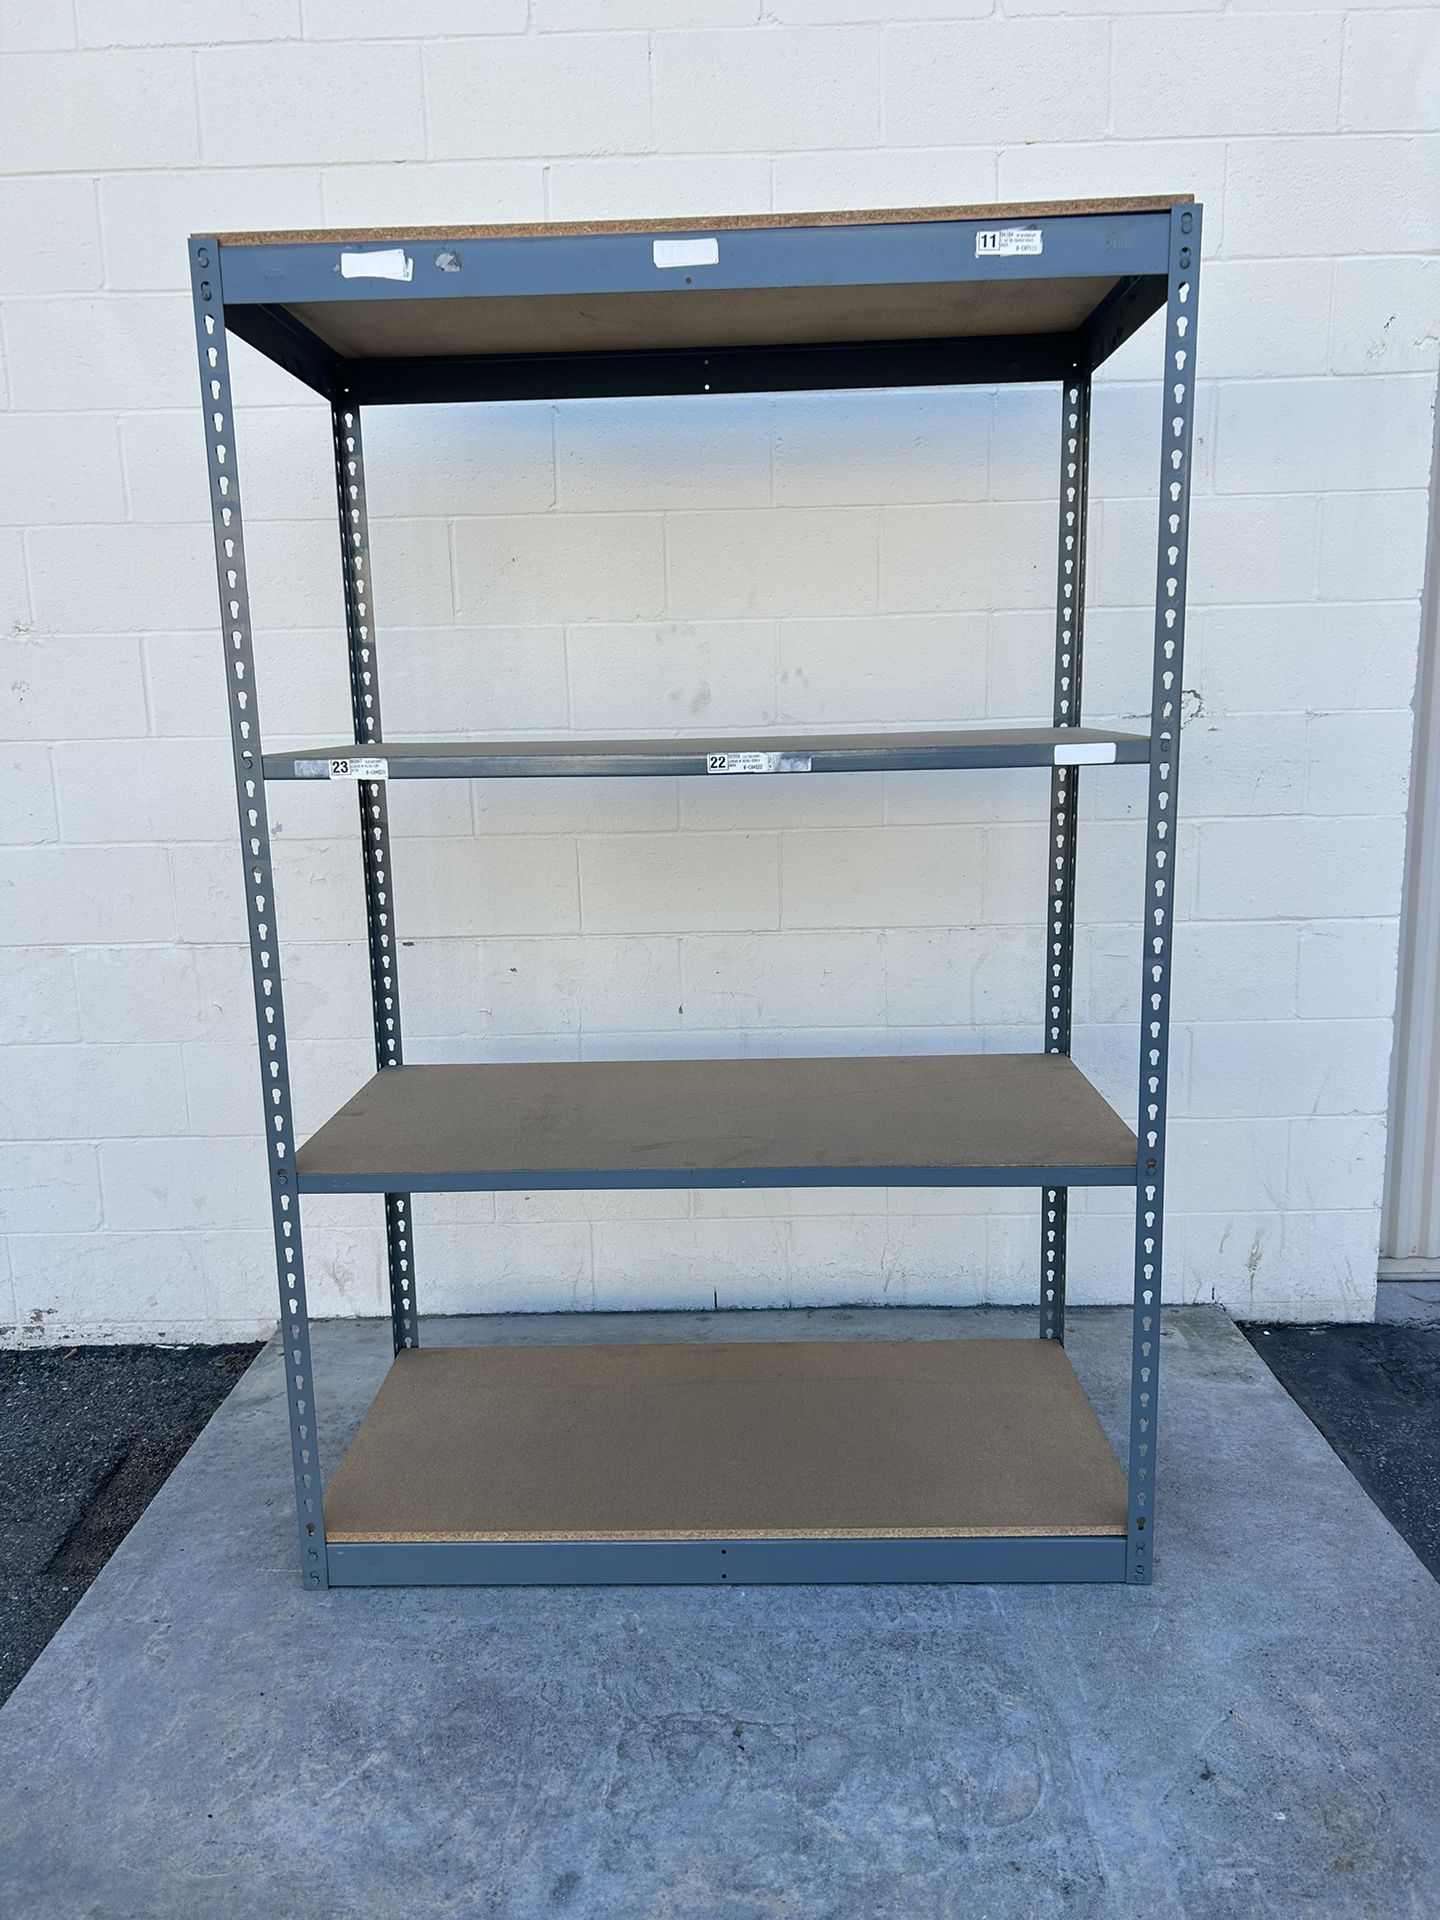 Industrial Shelves 4 Ft W X 2 Ft D Used! Warehouse Storage Shelving Boltless Supply Racks Better Than Homedepot Lowes Delivery Available